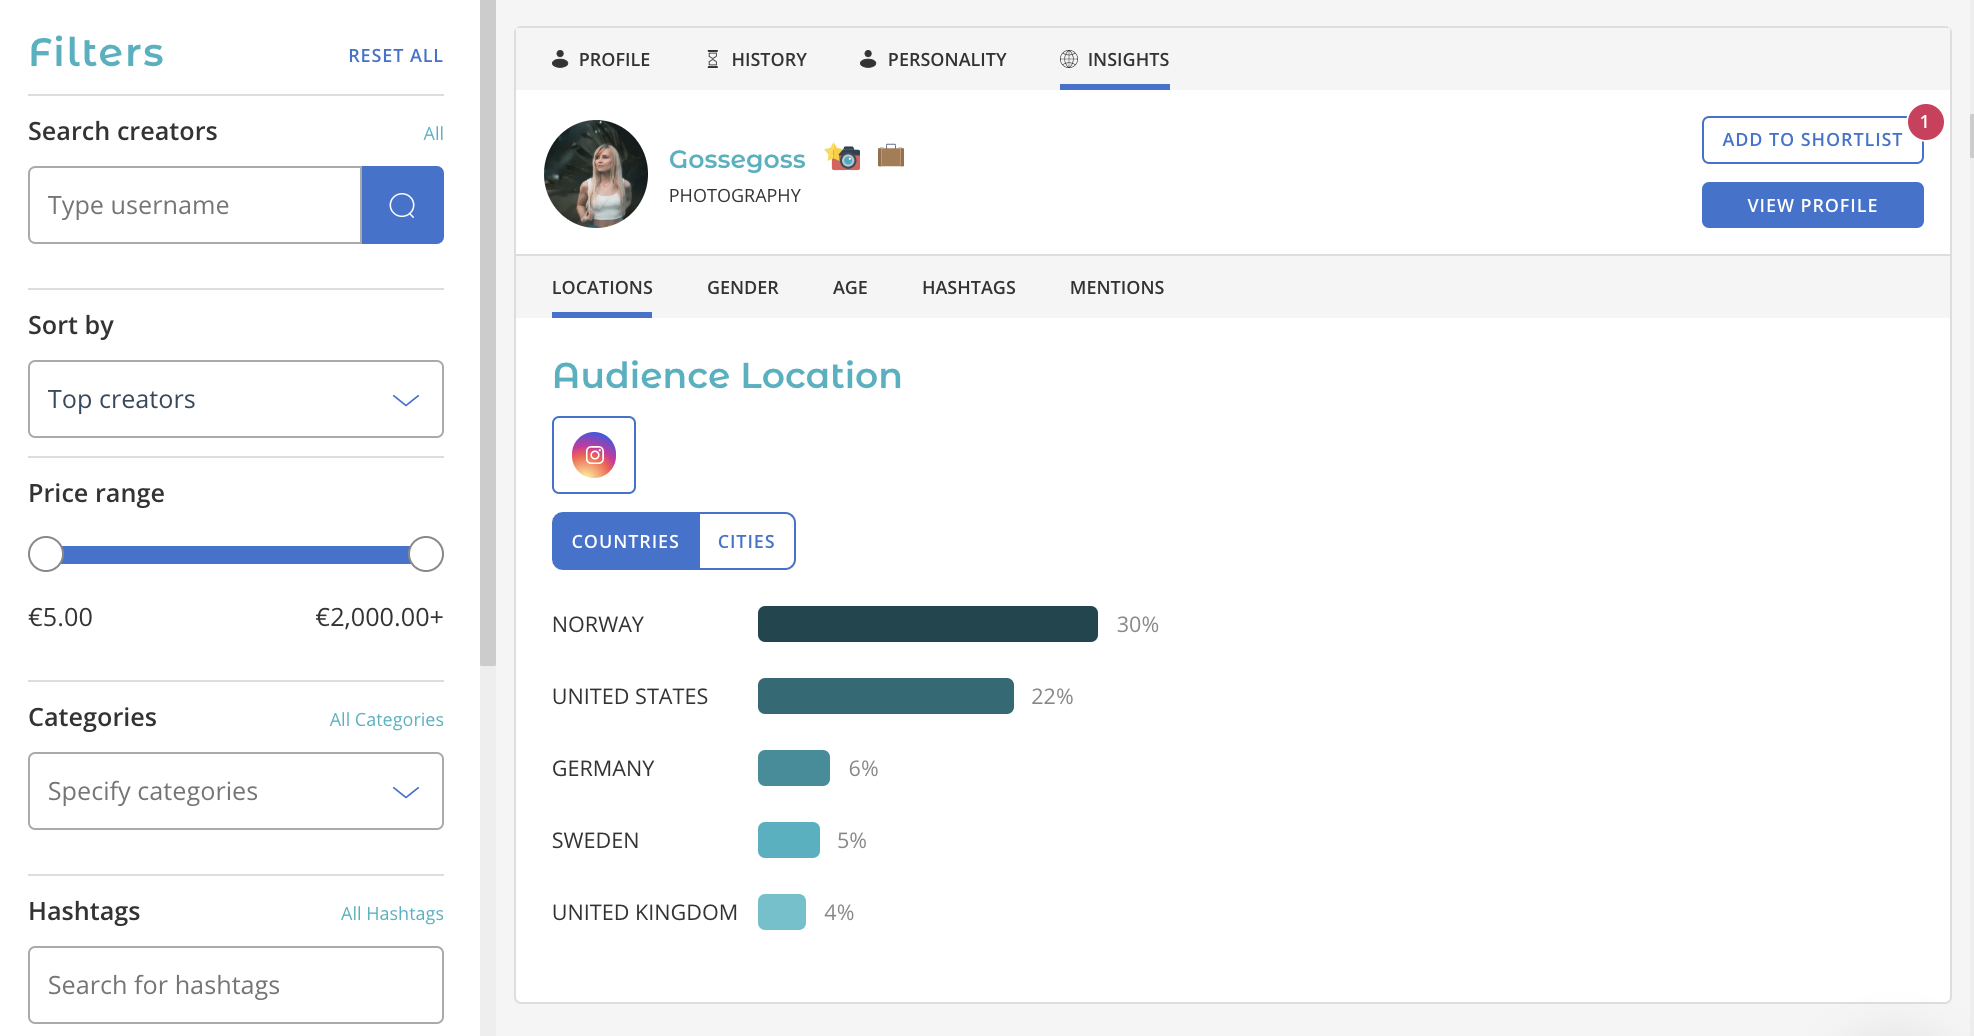 How to Find Influencers in Your Area?